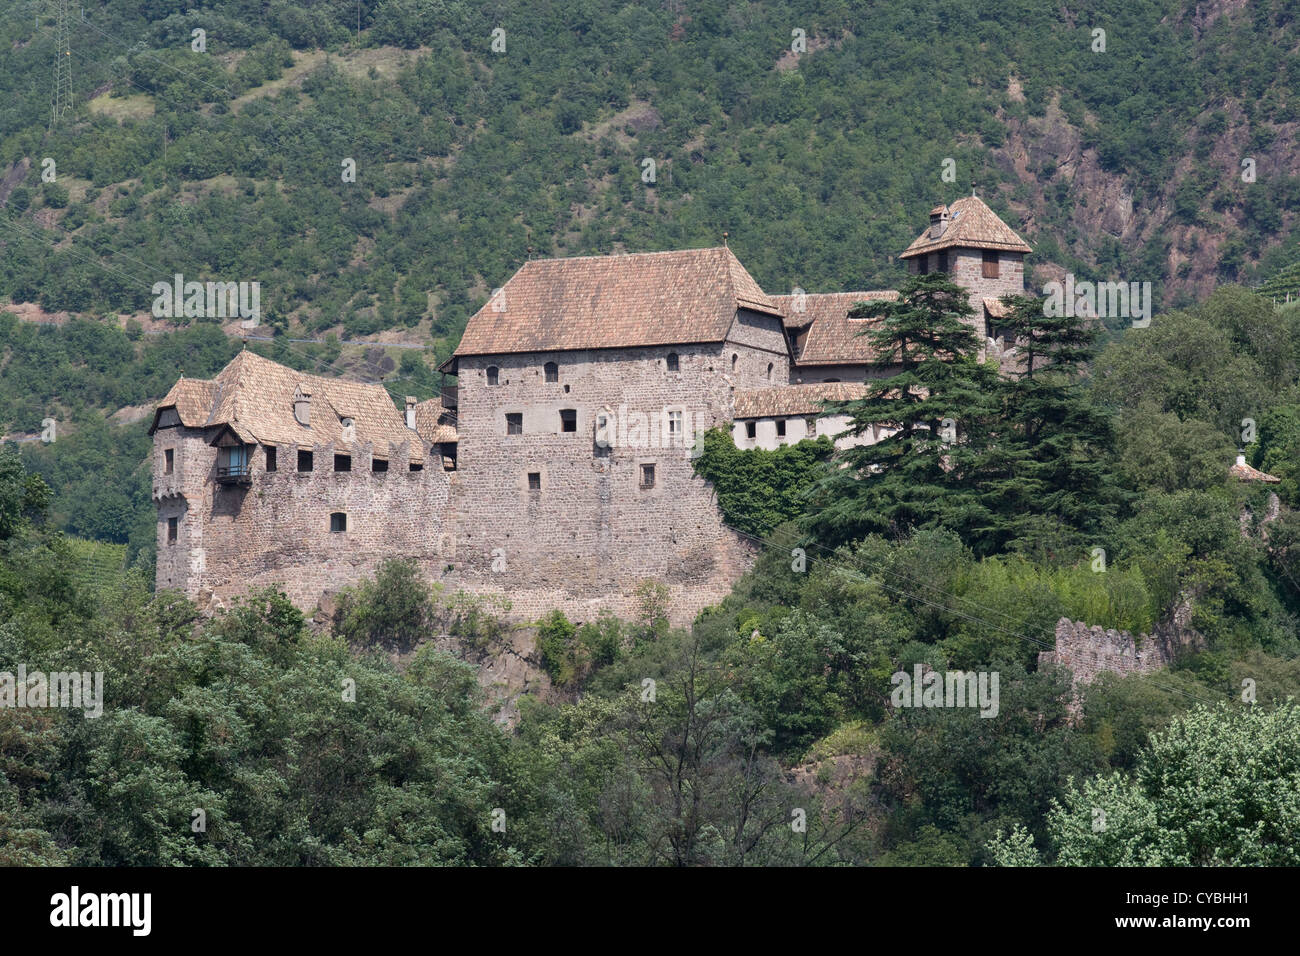 Castel Roncolo - exterior views of the medieval castle Stock Photo